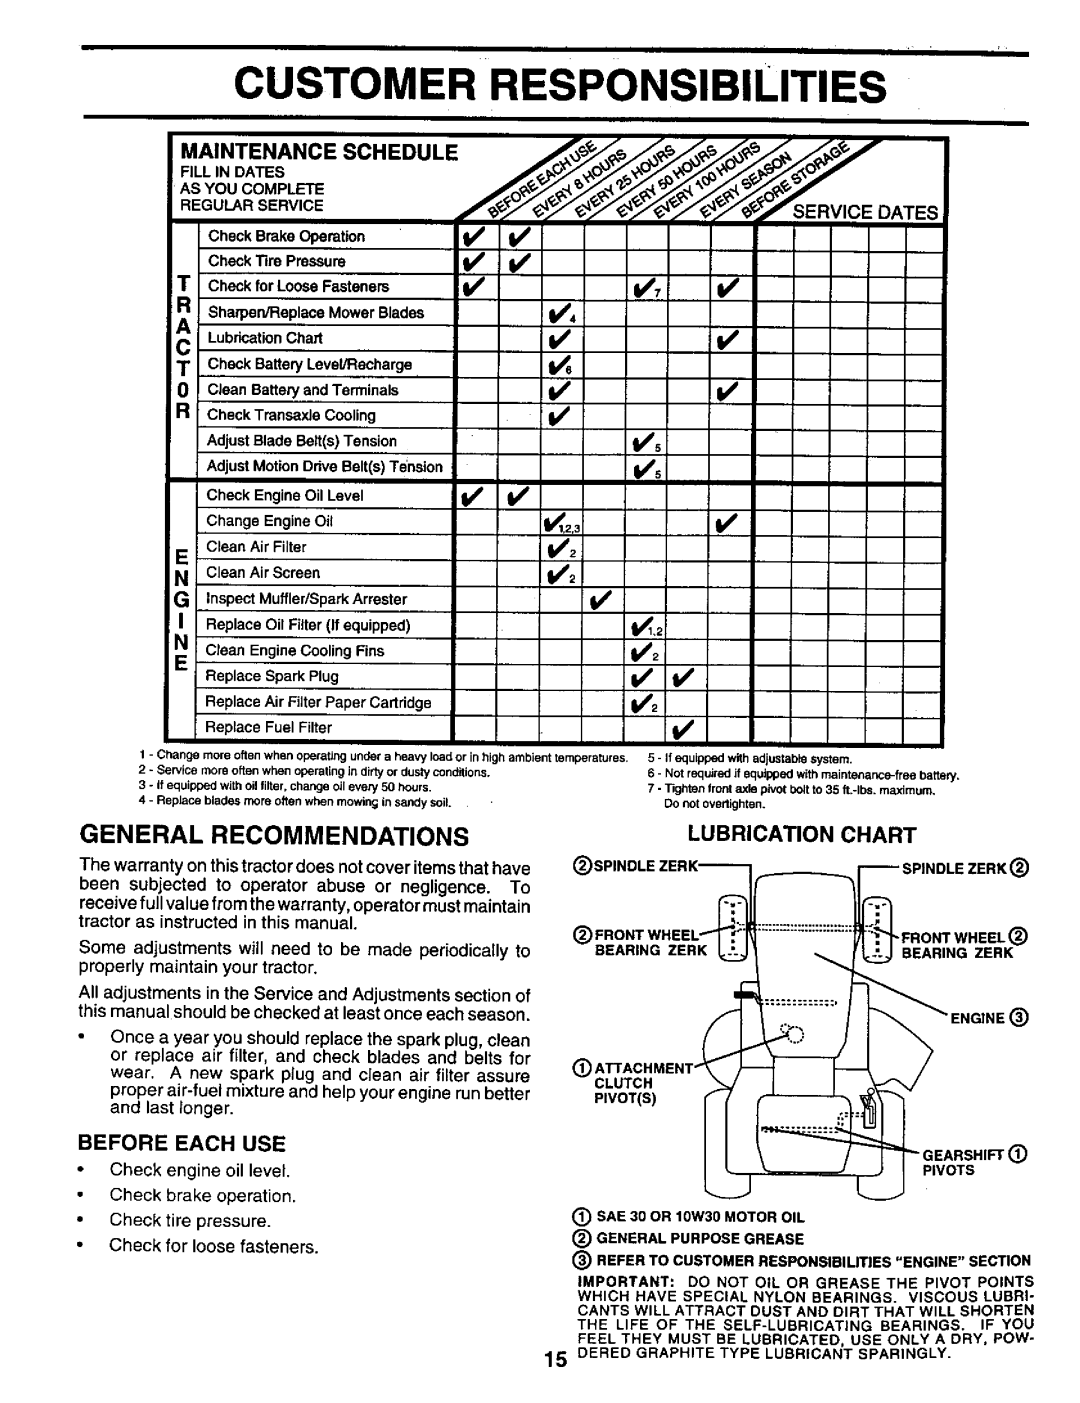 Craftsman 917.259561 Customer, Responsibilities, Reguberv,Ce, General Recommendations, Lubrication, Chart, ASYouCOMPL 